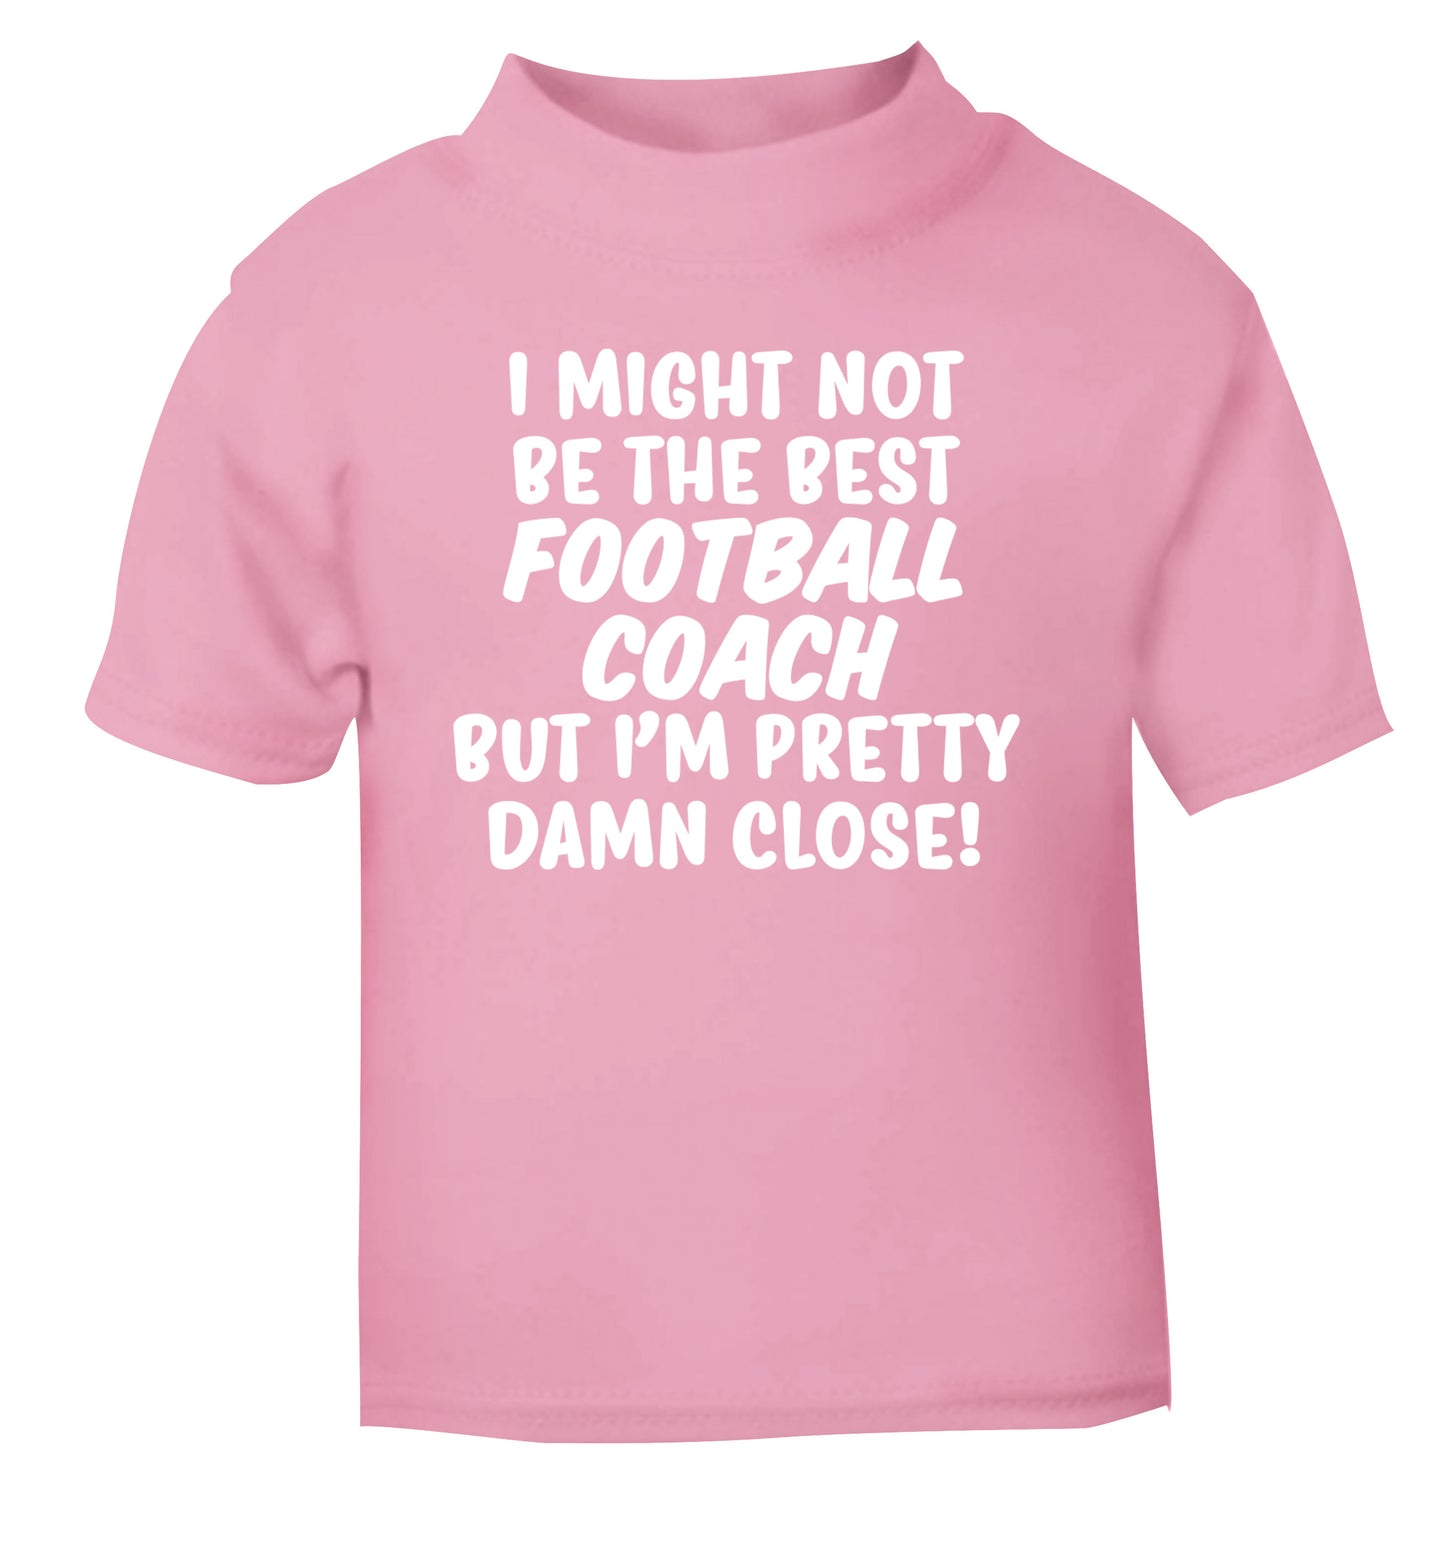 I might not be the best football coach but I'm pretty close! light pink Baby Toddler Tshirt 2 Years